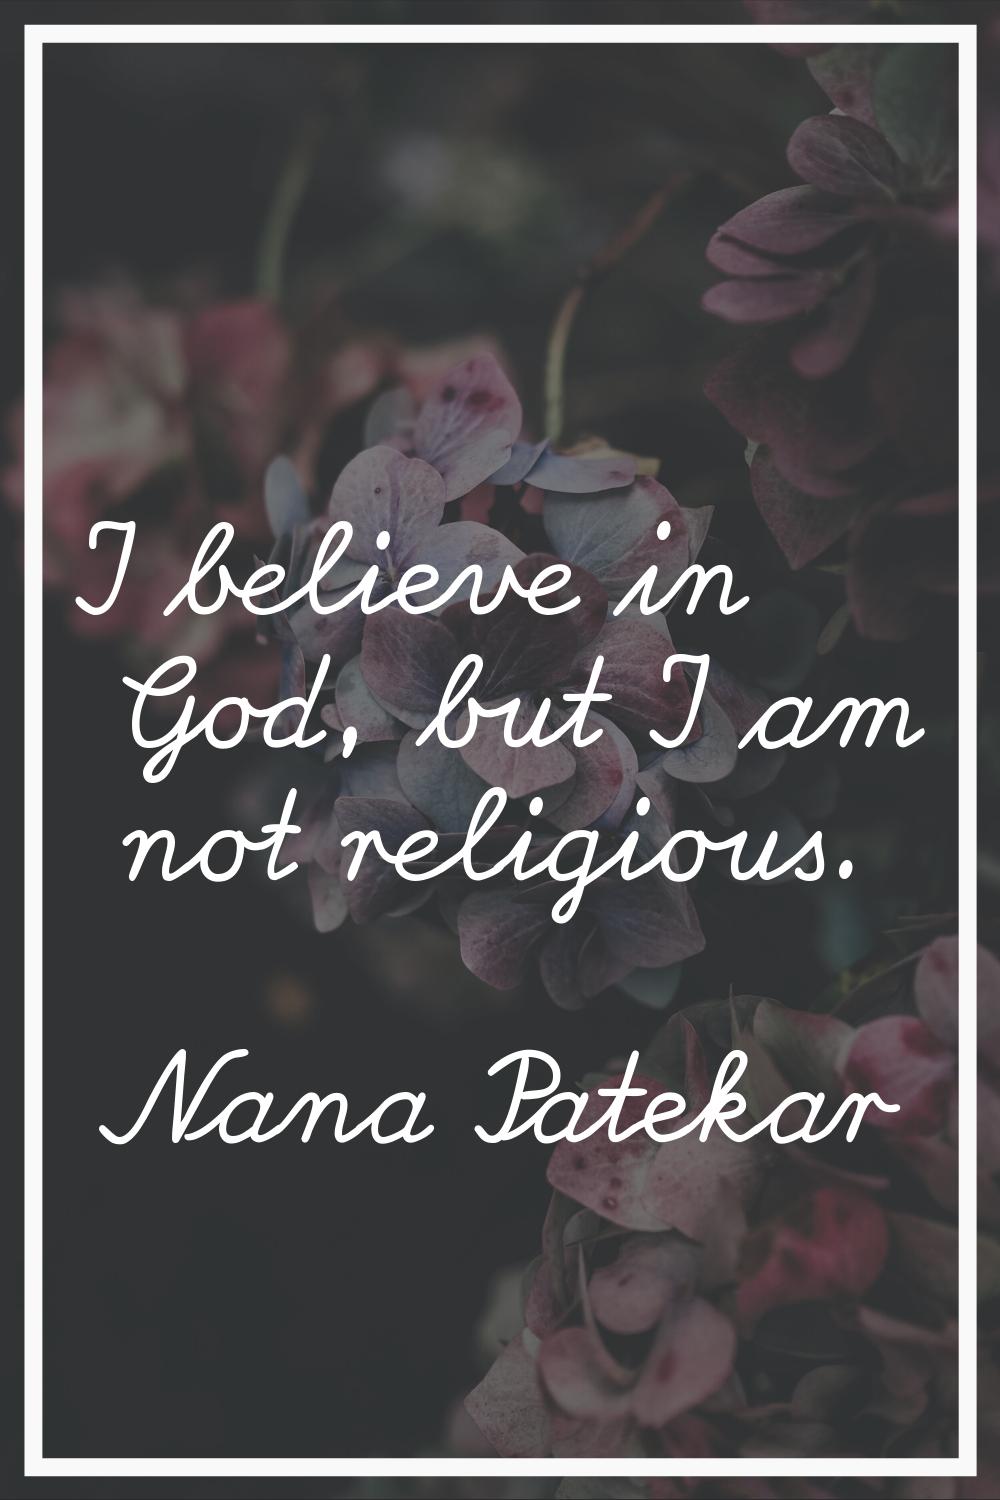 I believe in God, but I am not religious.